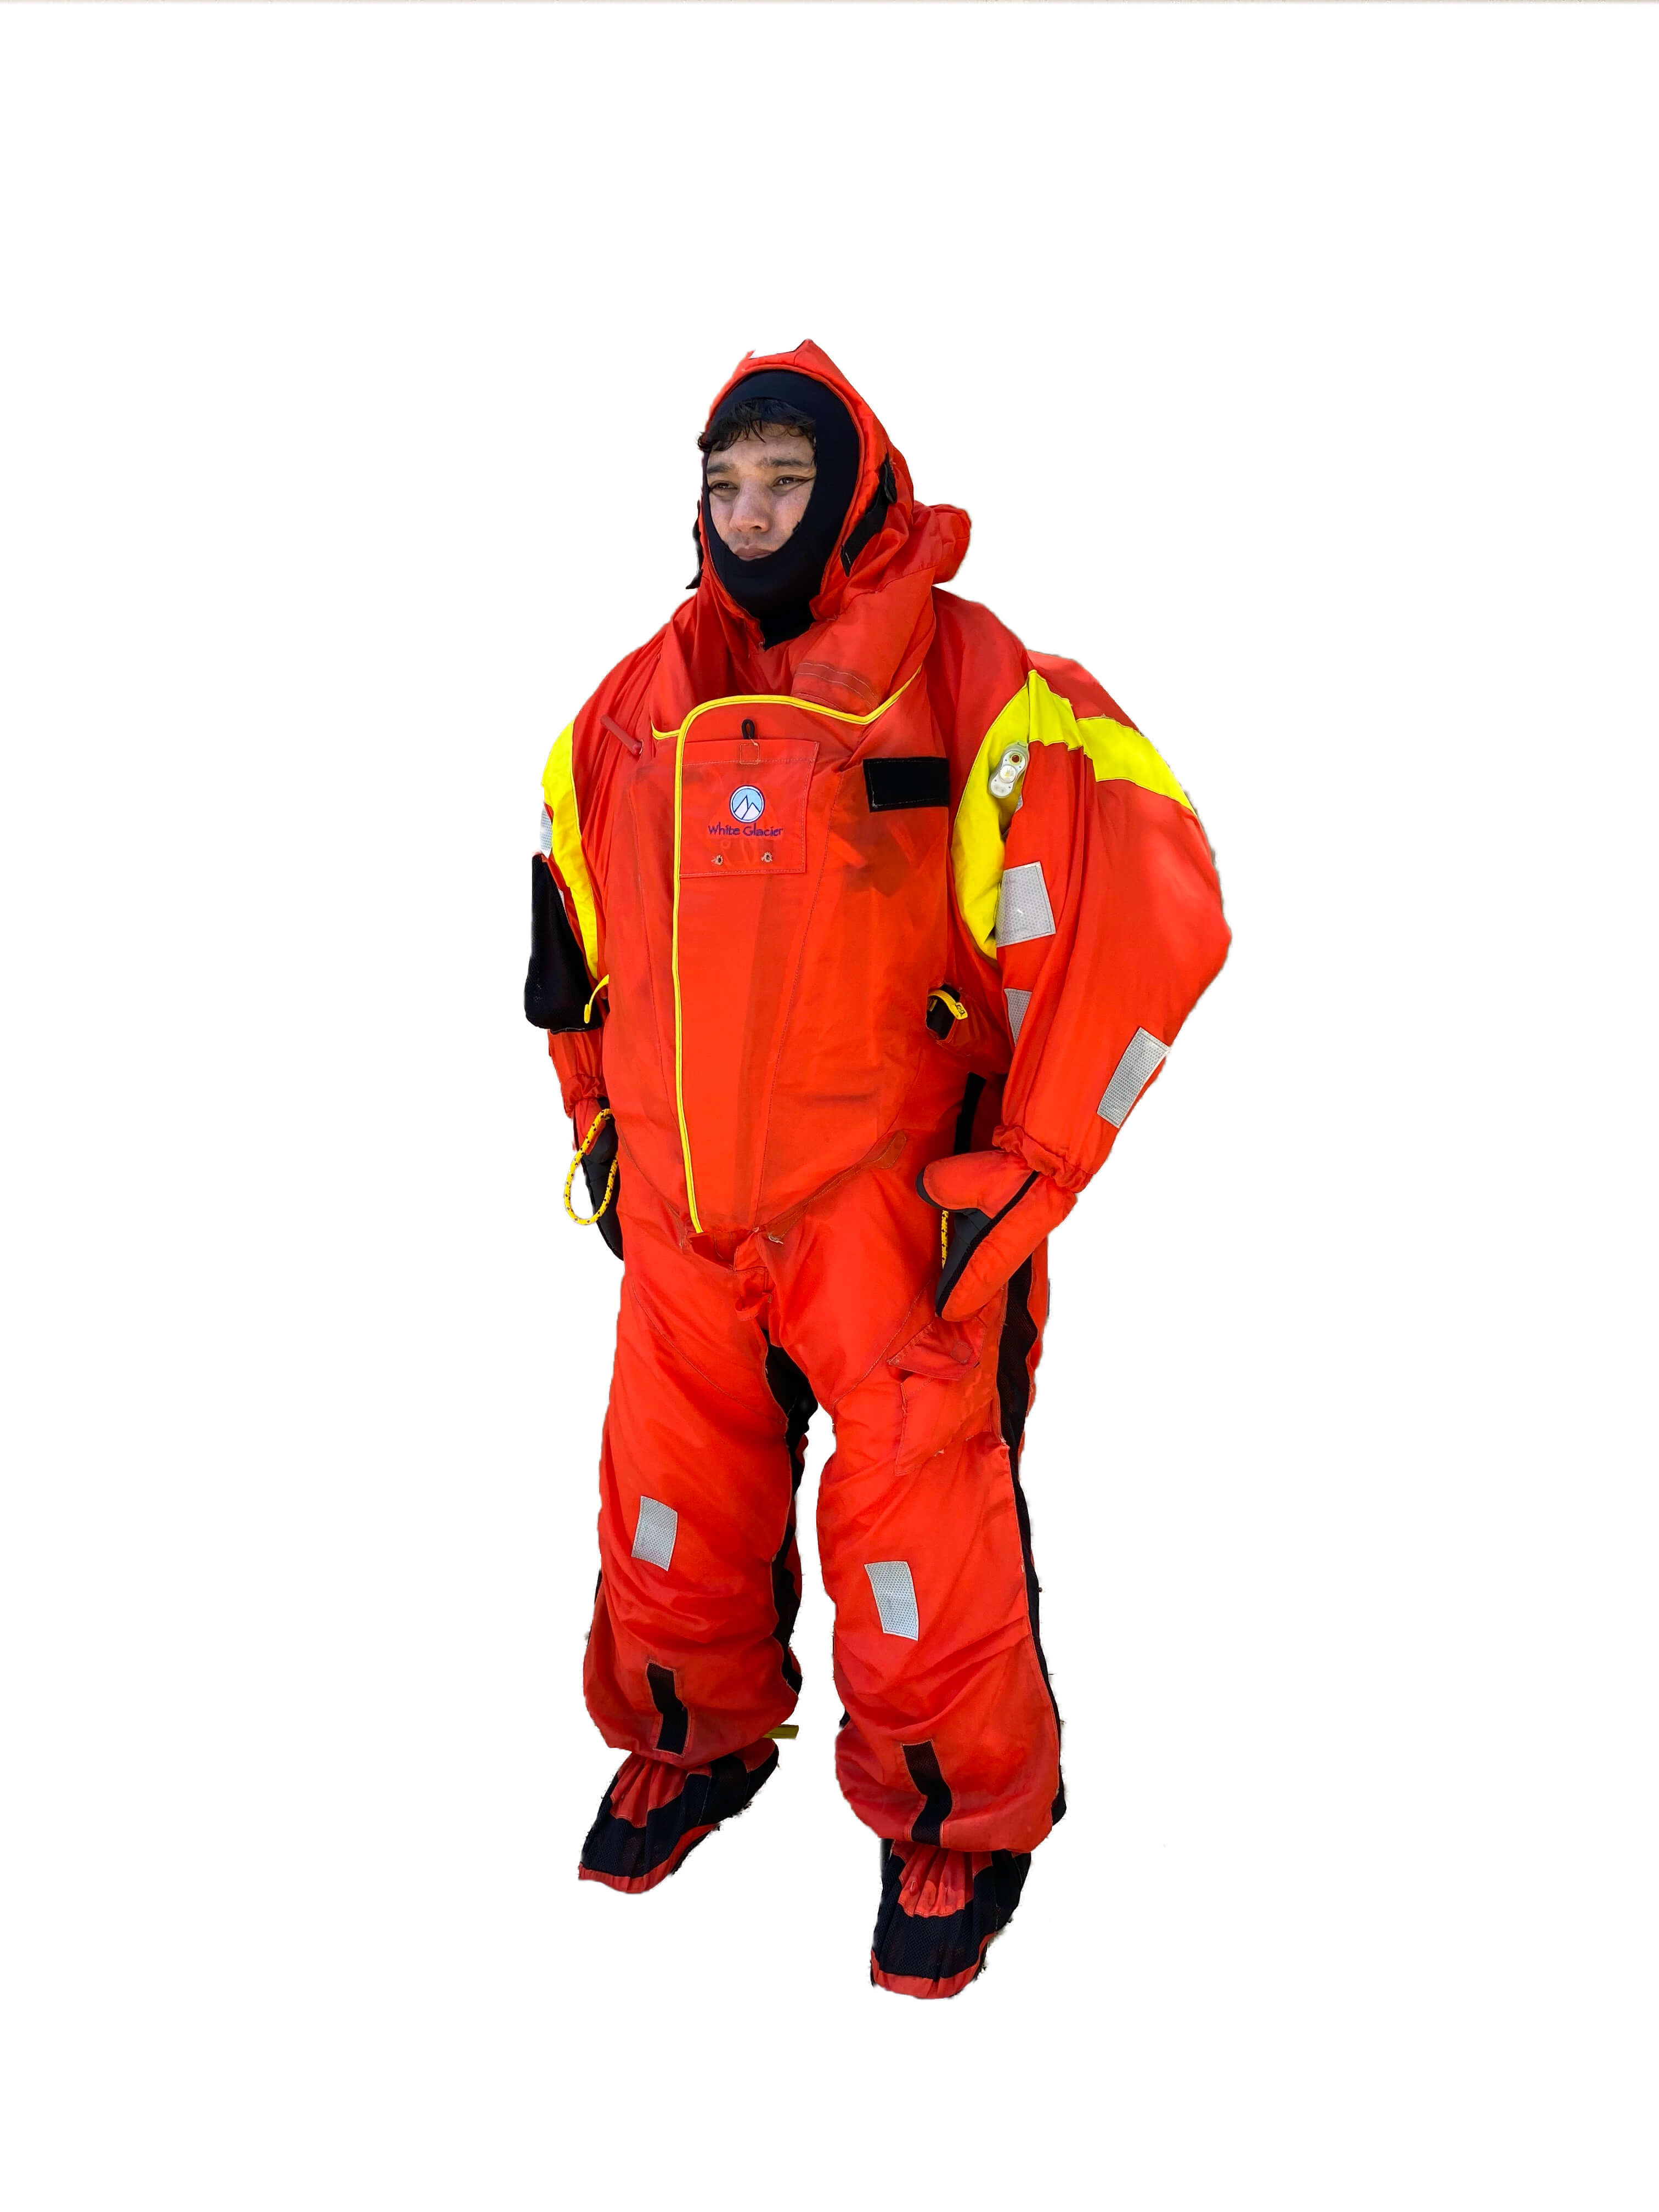 White Glacier Arctic Survival Suit First to Exceed Testing Standards